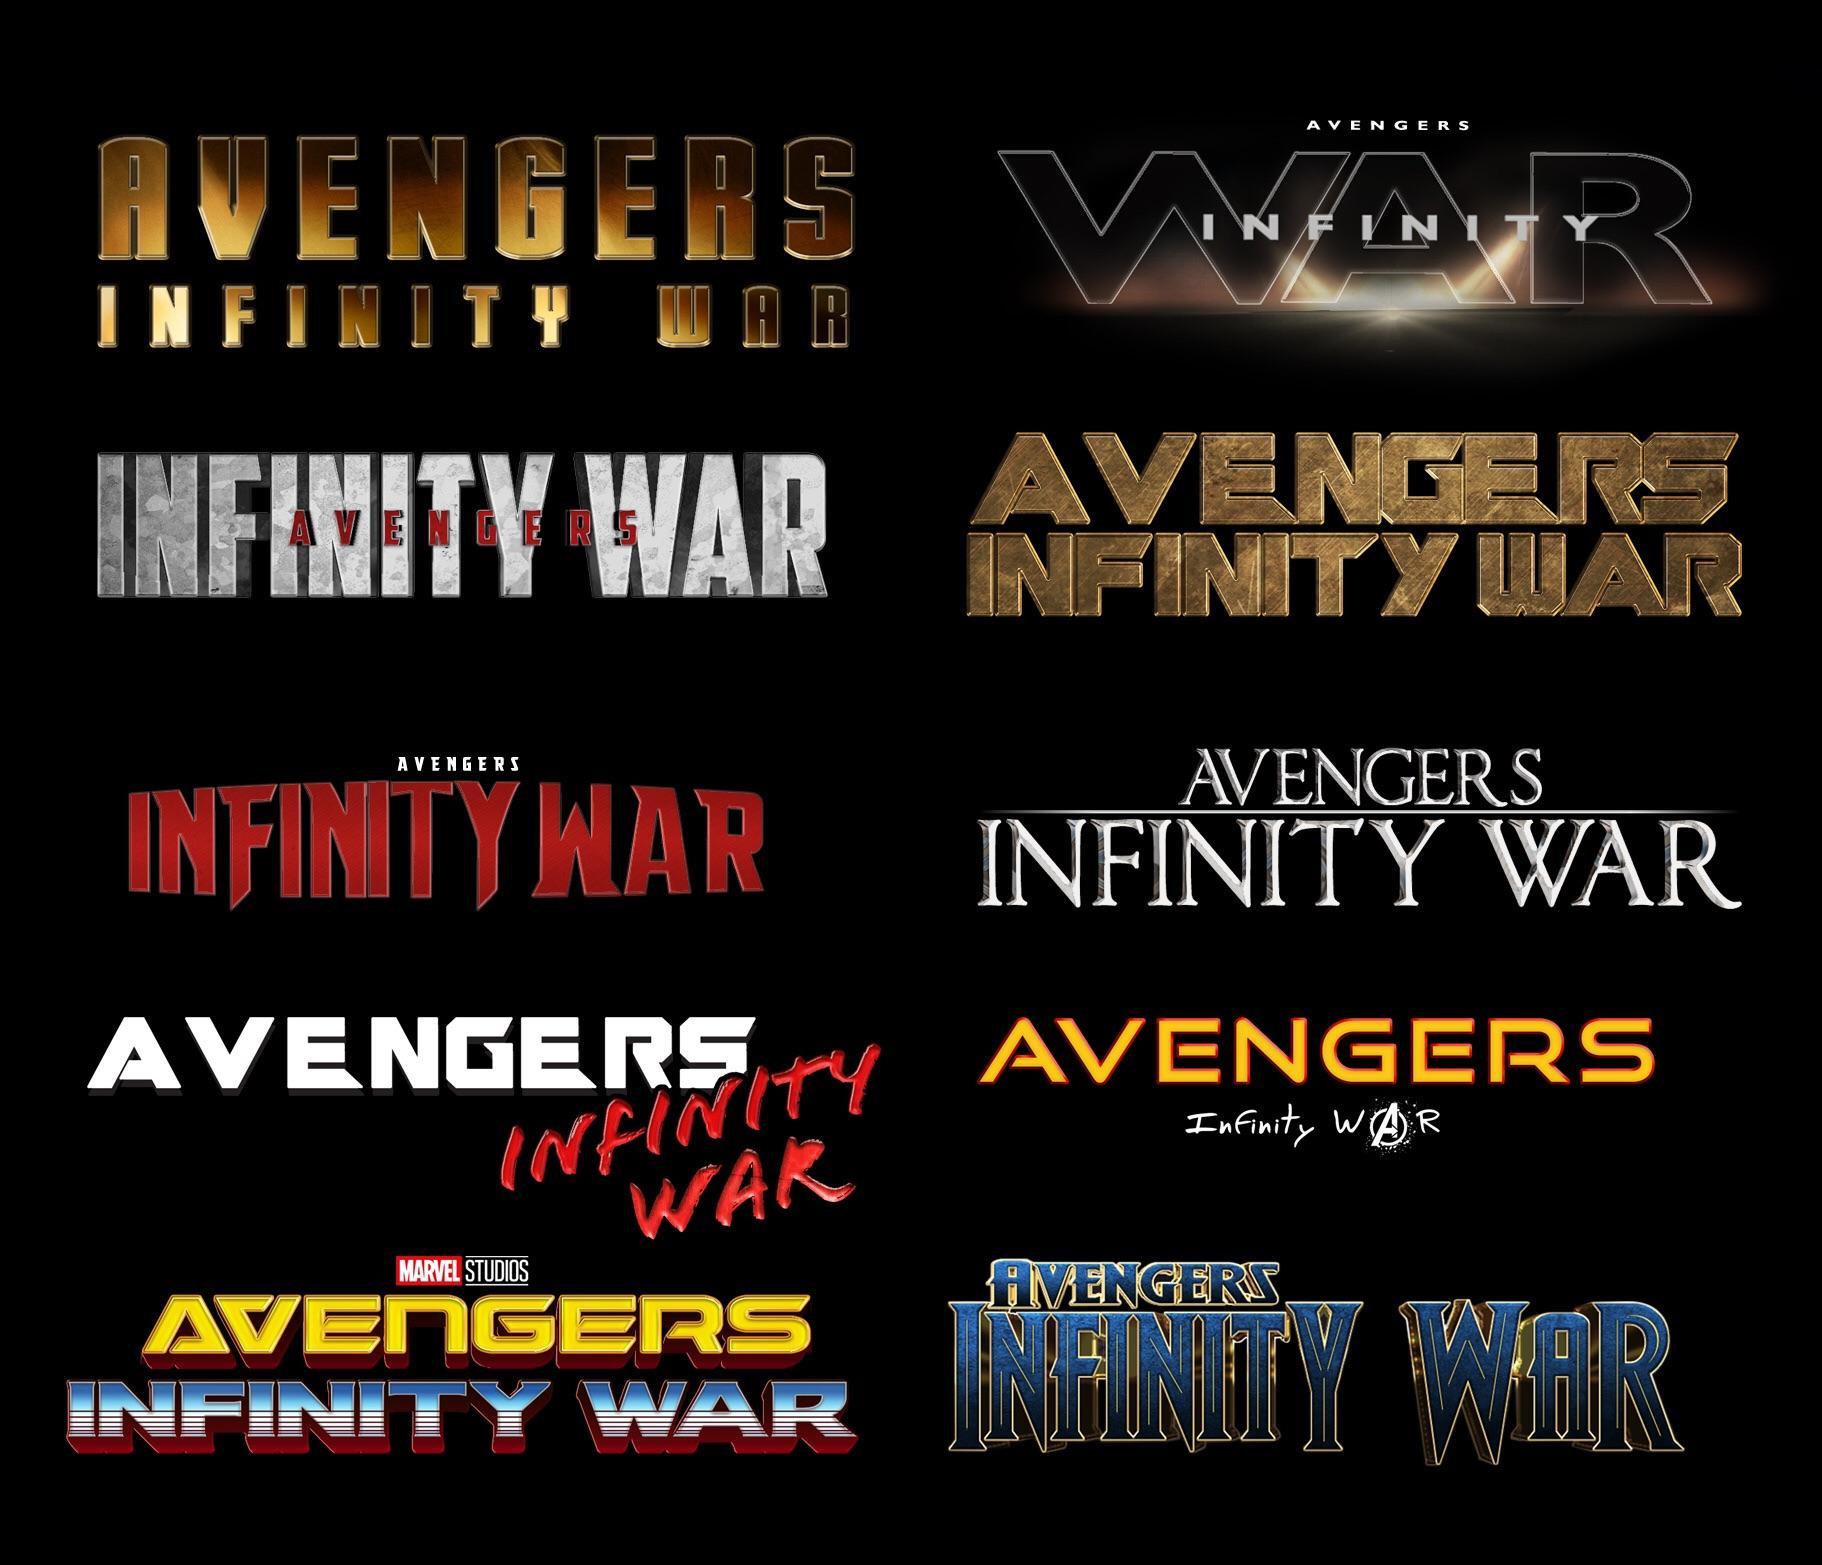 Avengers Infinity War Logo - Avengers Infinity War, but in the style of past MCU Movie Logos ...